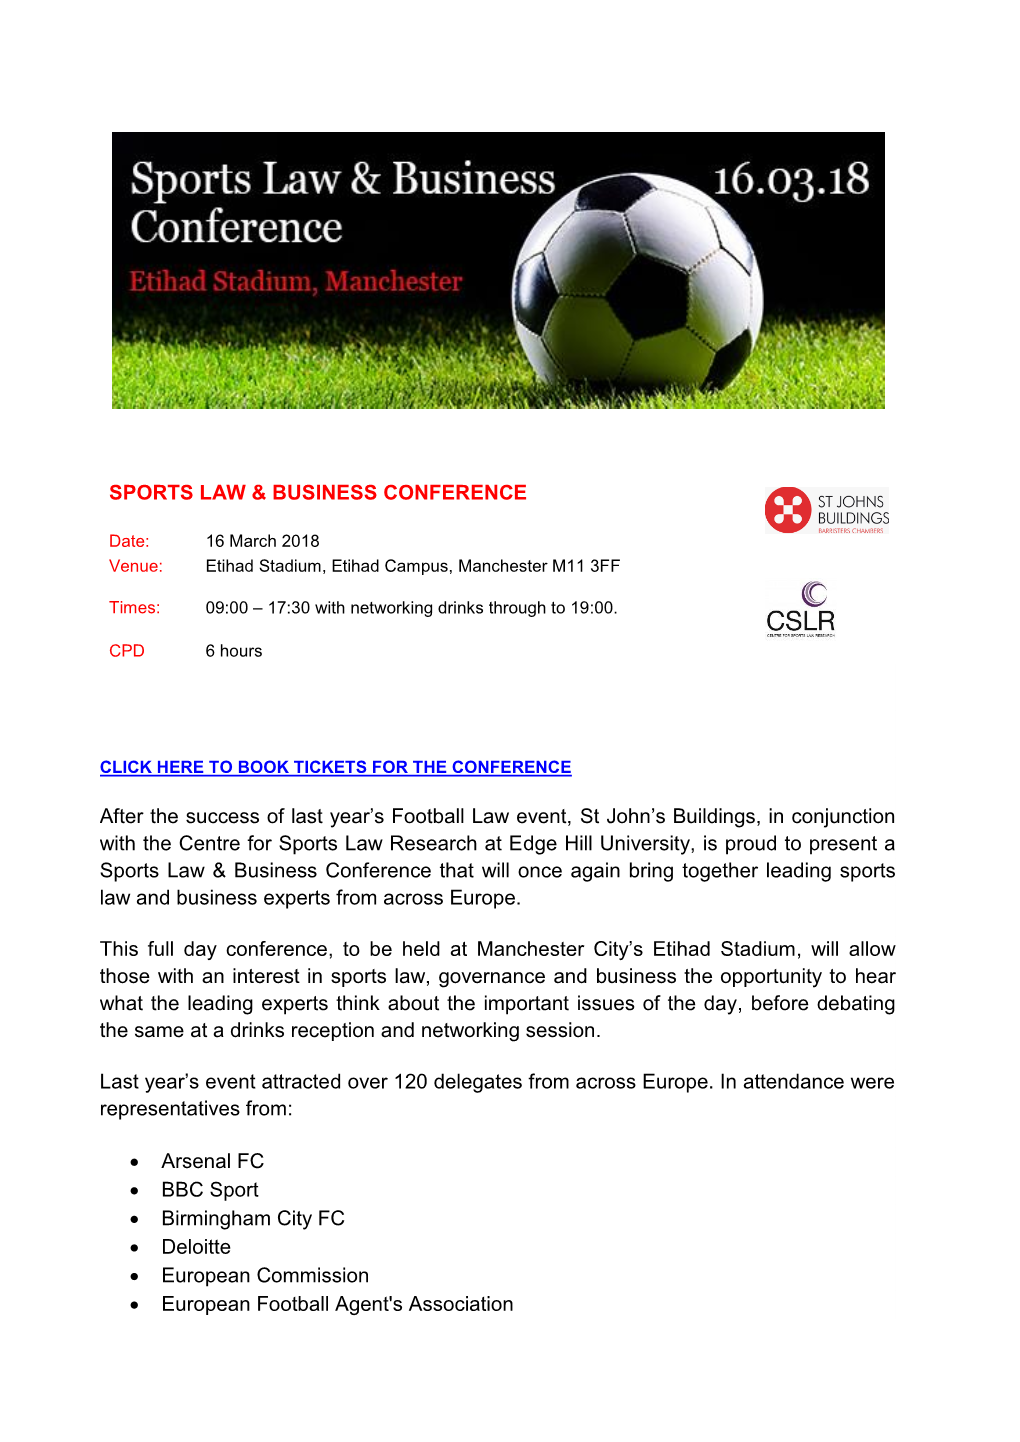 SPORTS LAW & BUSINESS CONFERENCE After the Success Of